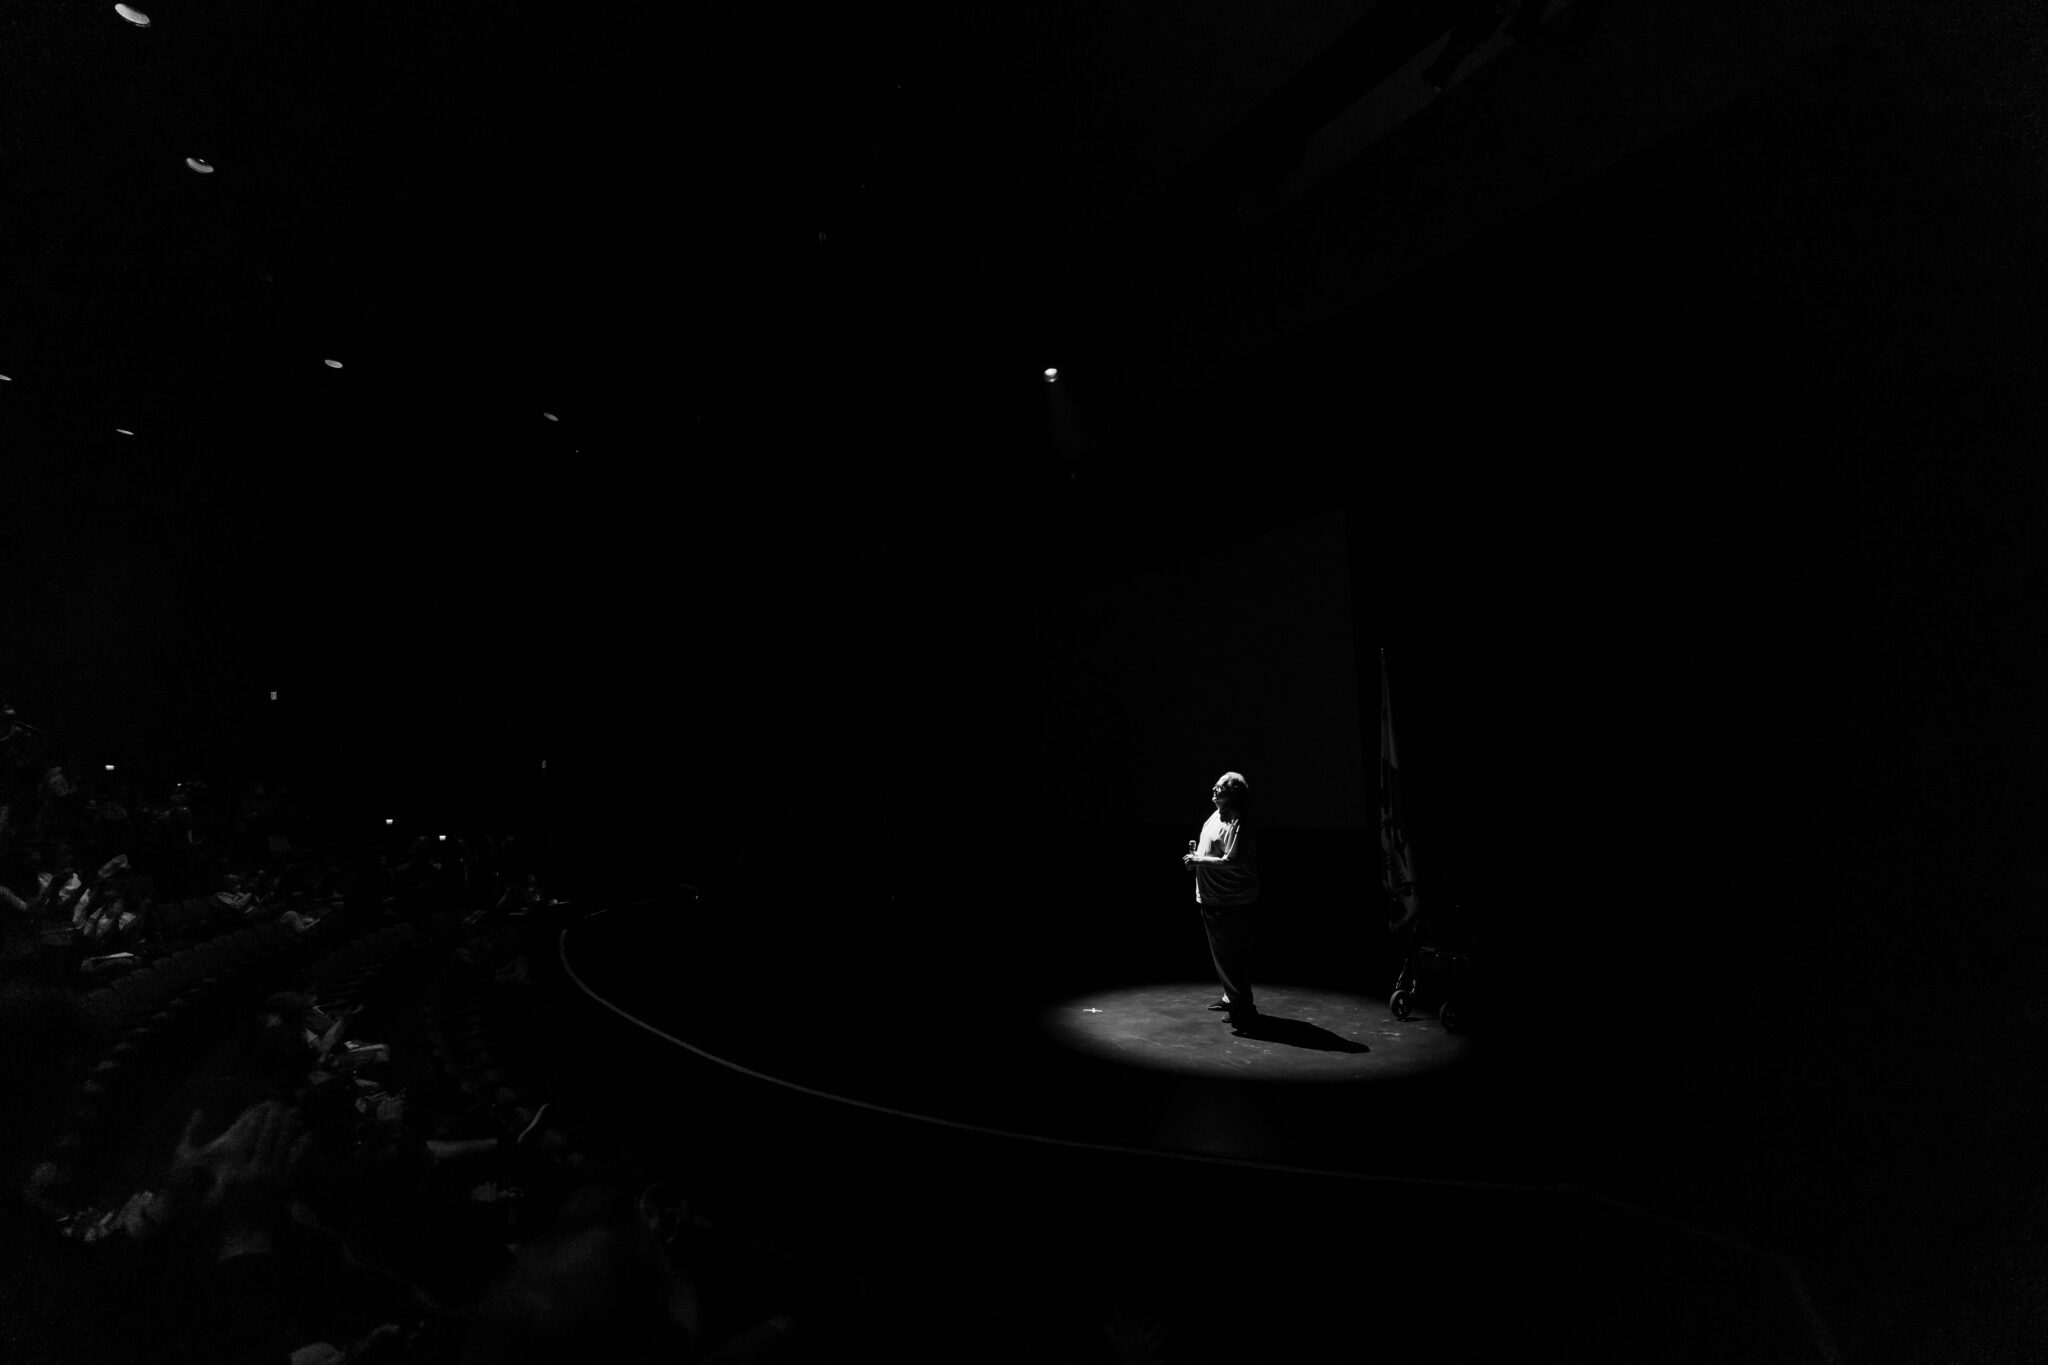 Steve Auger on stage in silhouette